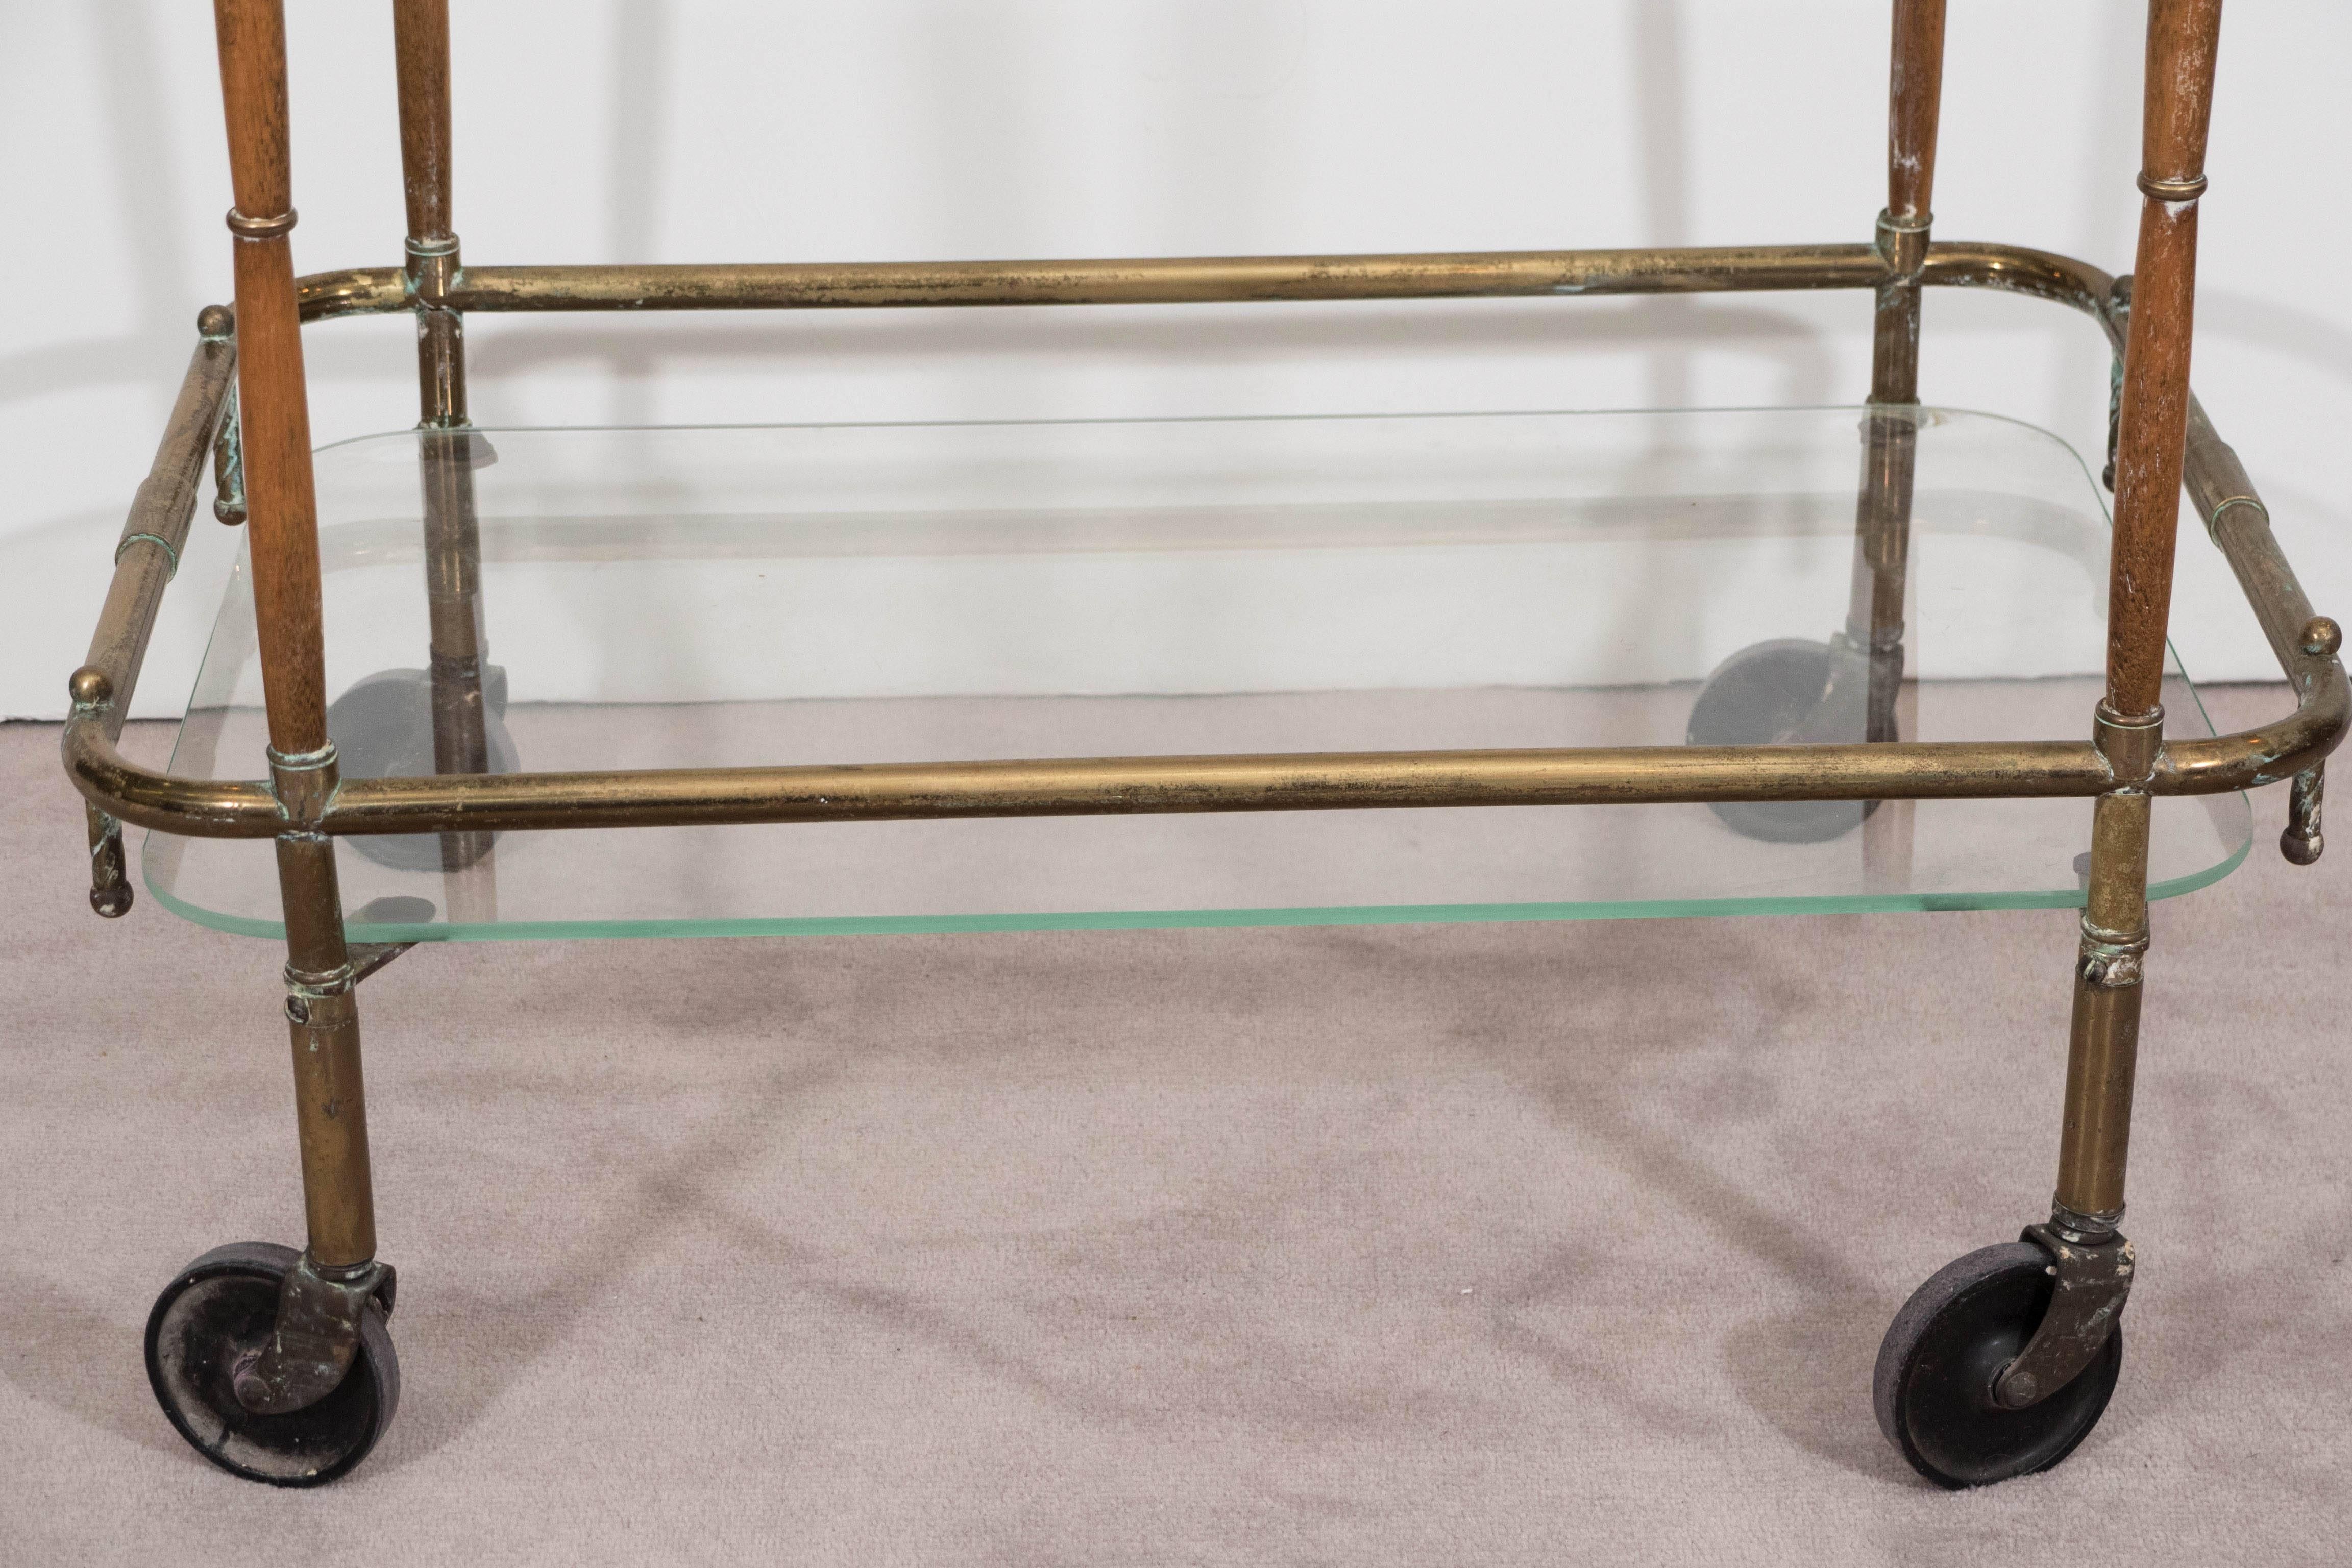 A bar cart and service trolley, produced in Italy circa 1960s, with two glass shelves against a tubular brass frame with push handle, accented with turned wood to the legs, on original casters. The cart remains in overall good vintage condition,